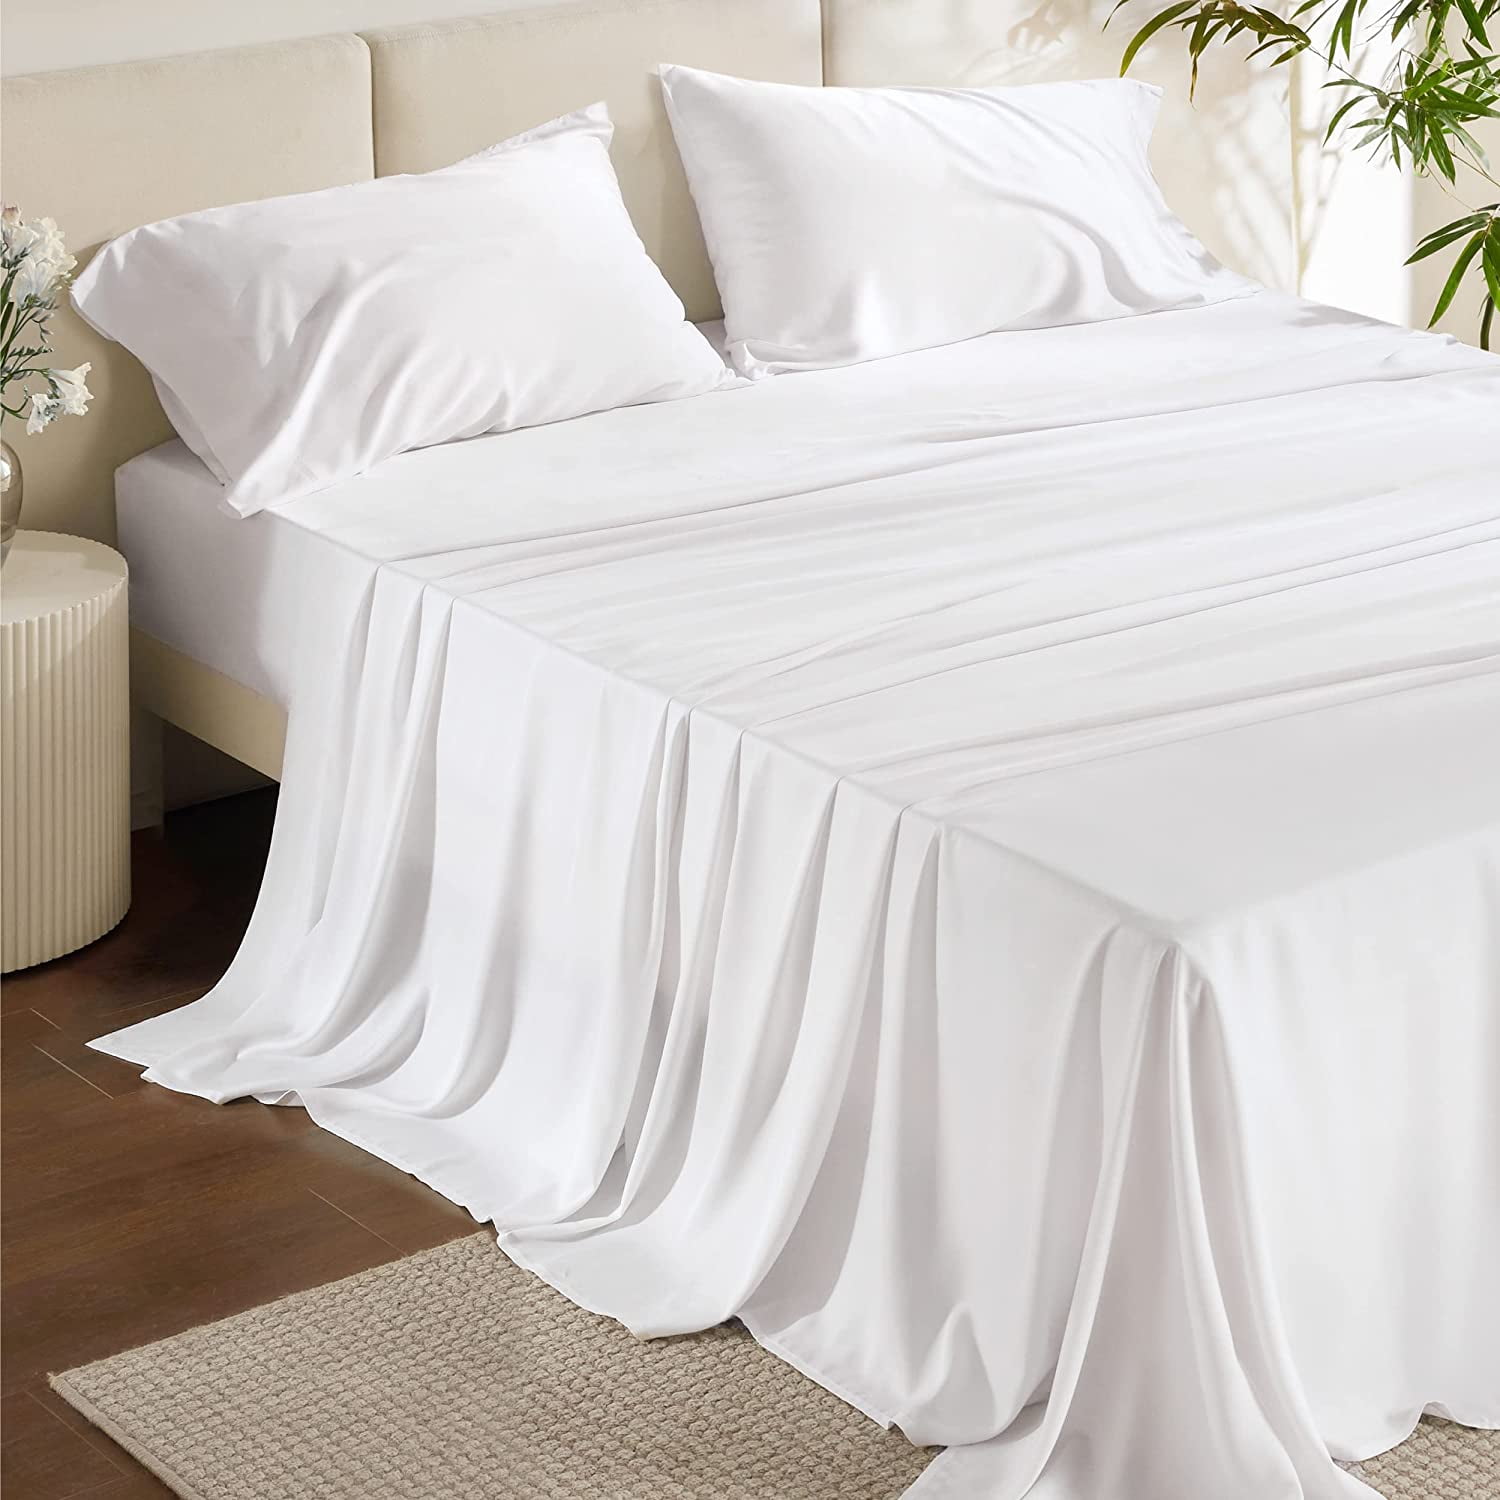 Bedsure Queen Sheets White - Soft Sheets for Queen Size Bed, 4 Pieces Hotel  Luxury White Sheets Quee…See more Bedsure Queen Sheets White - Soft Sheets